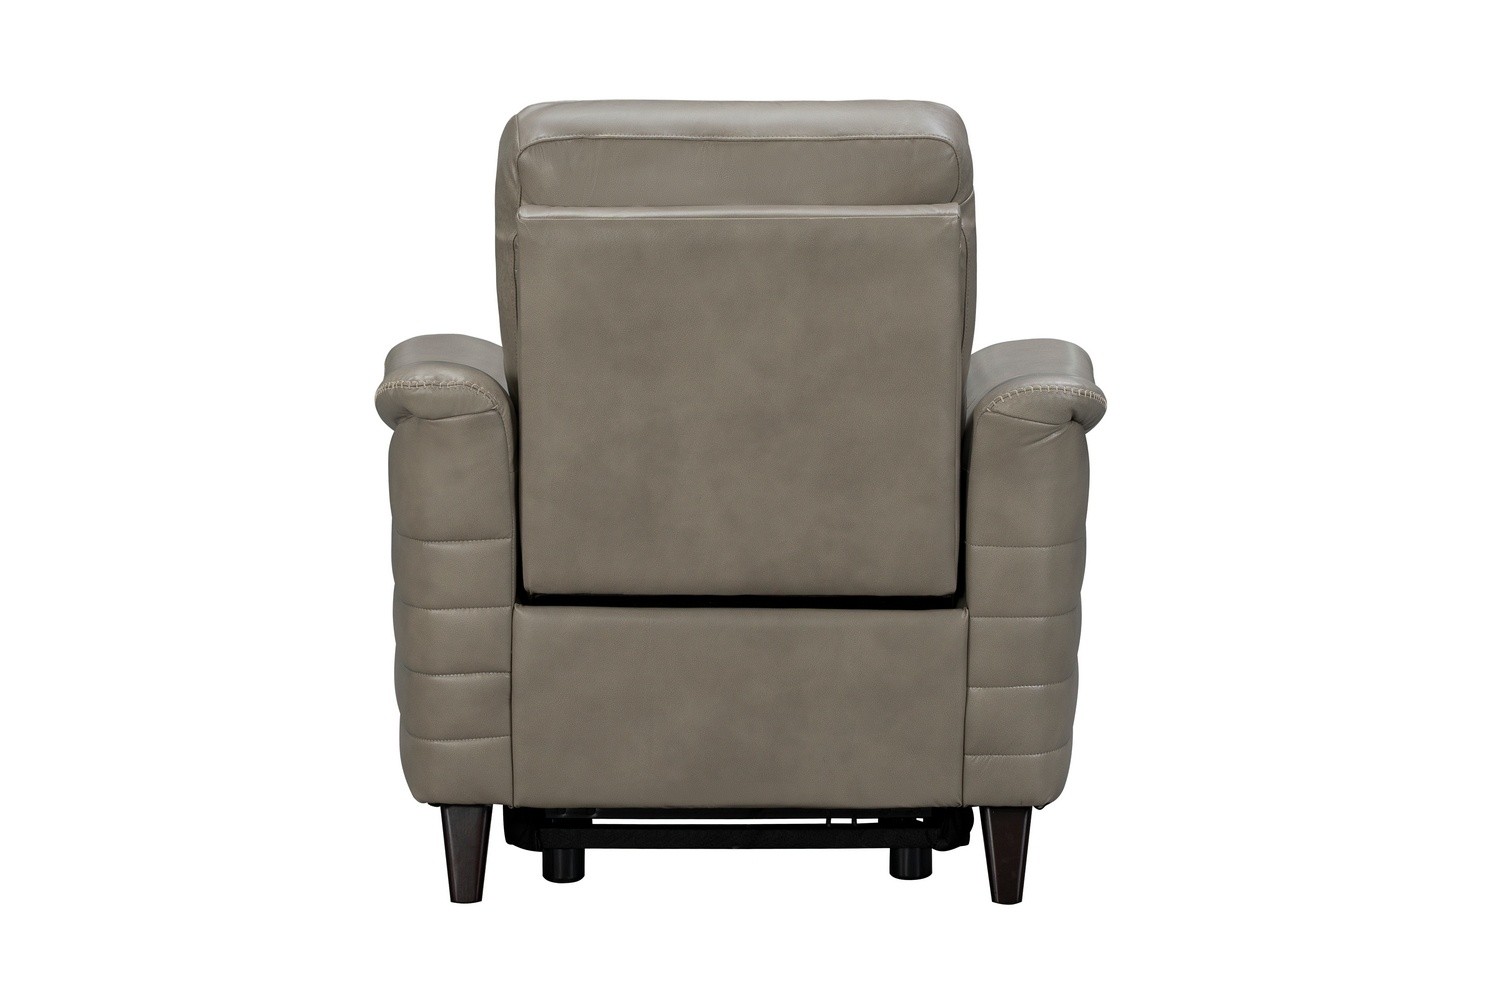 Barcalounger Malone Power Recliner Chair with Power Head Rest - Sergi Gray Beige/Leather Match